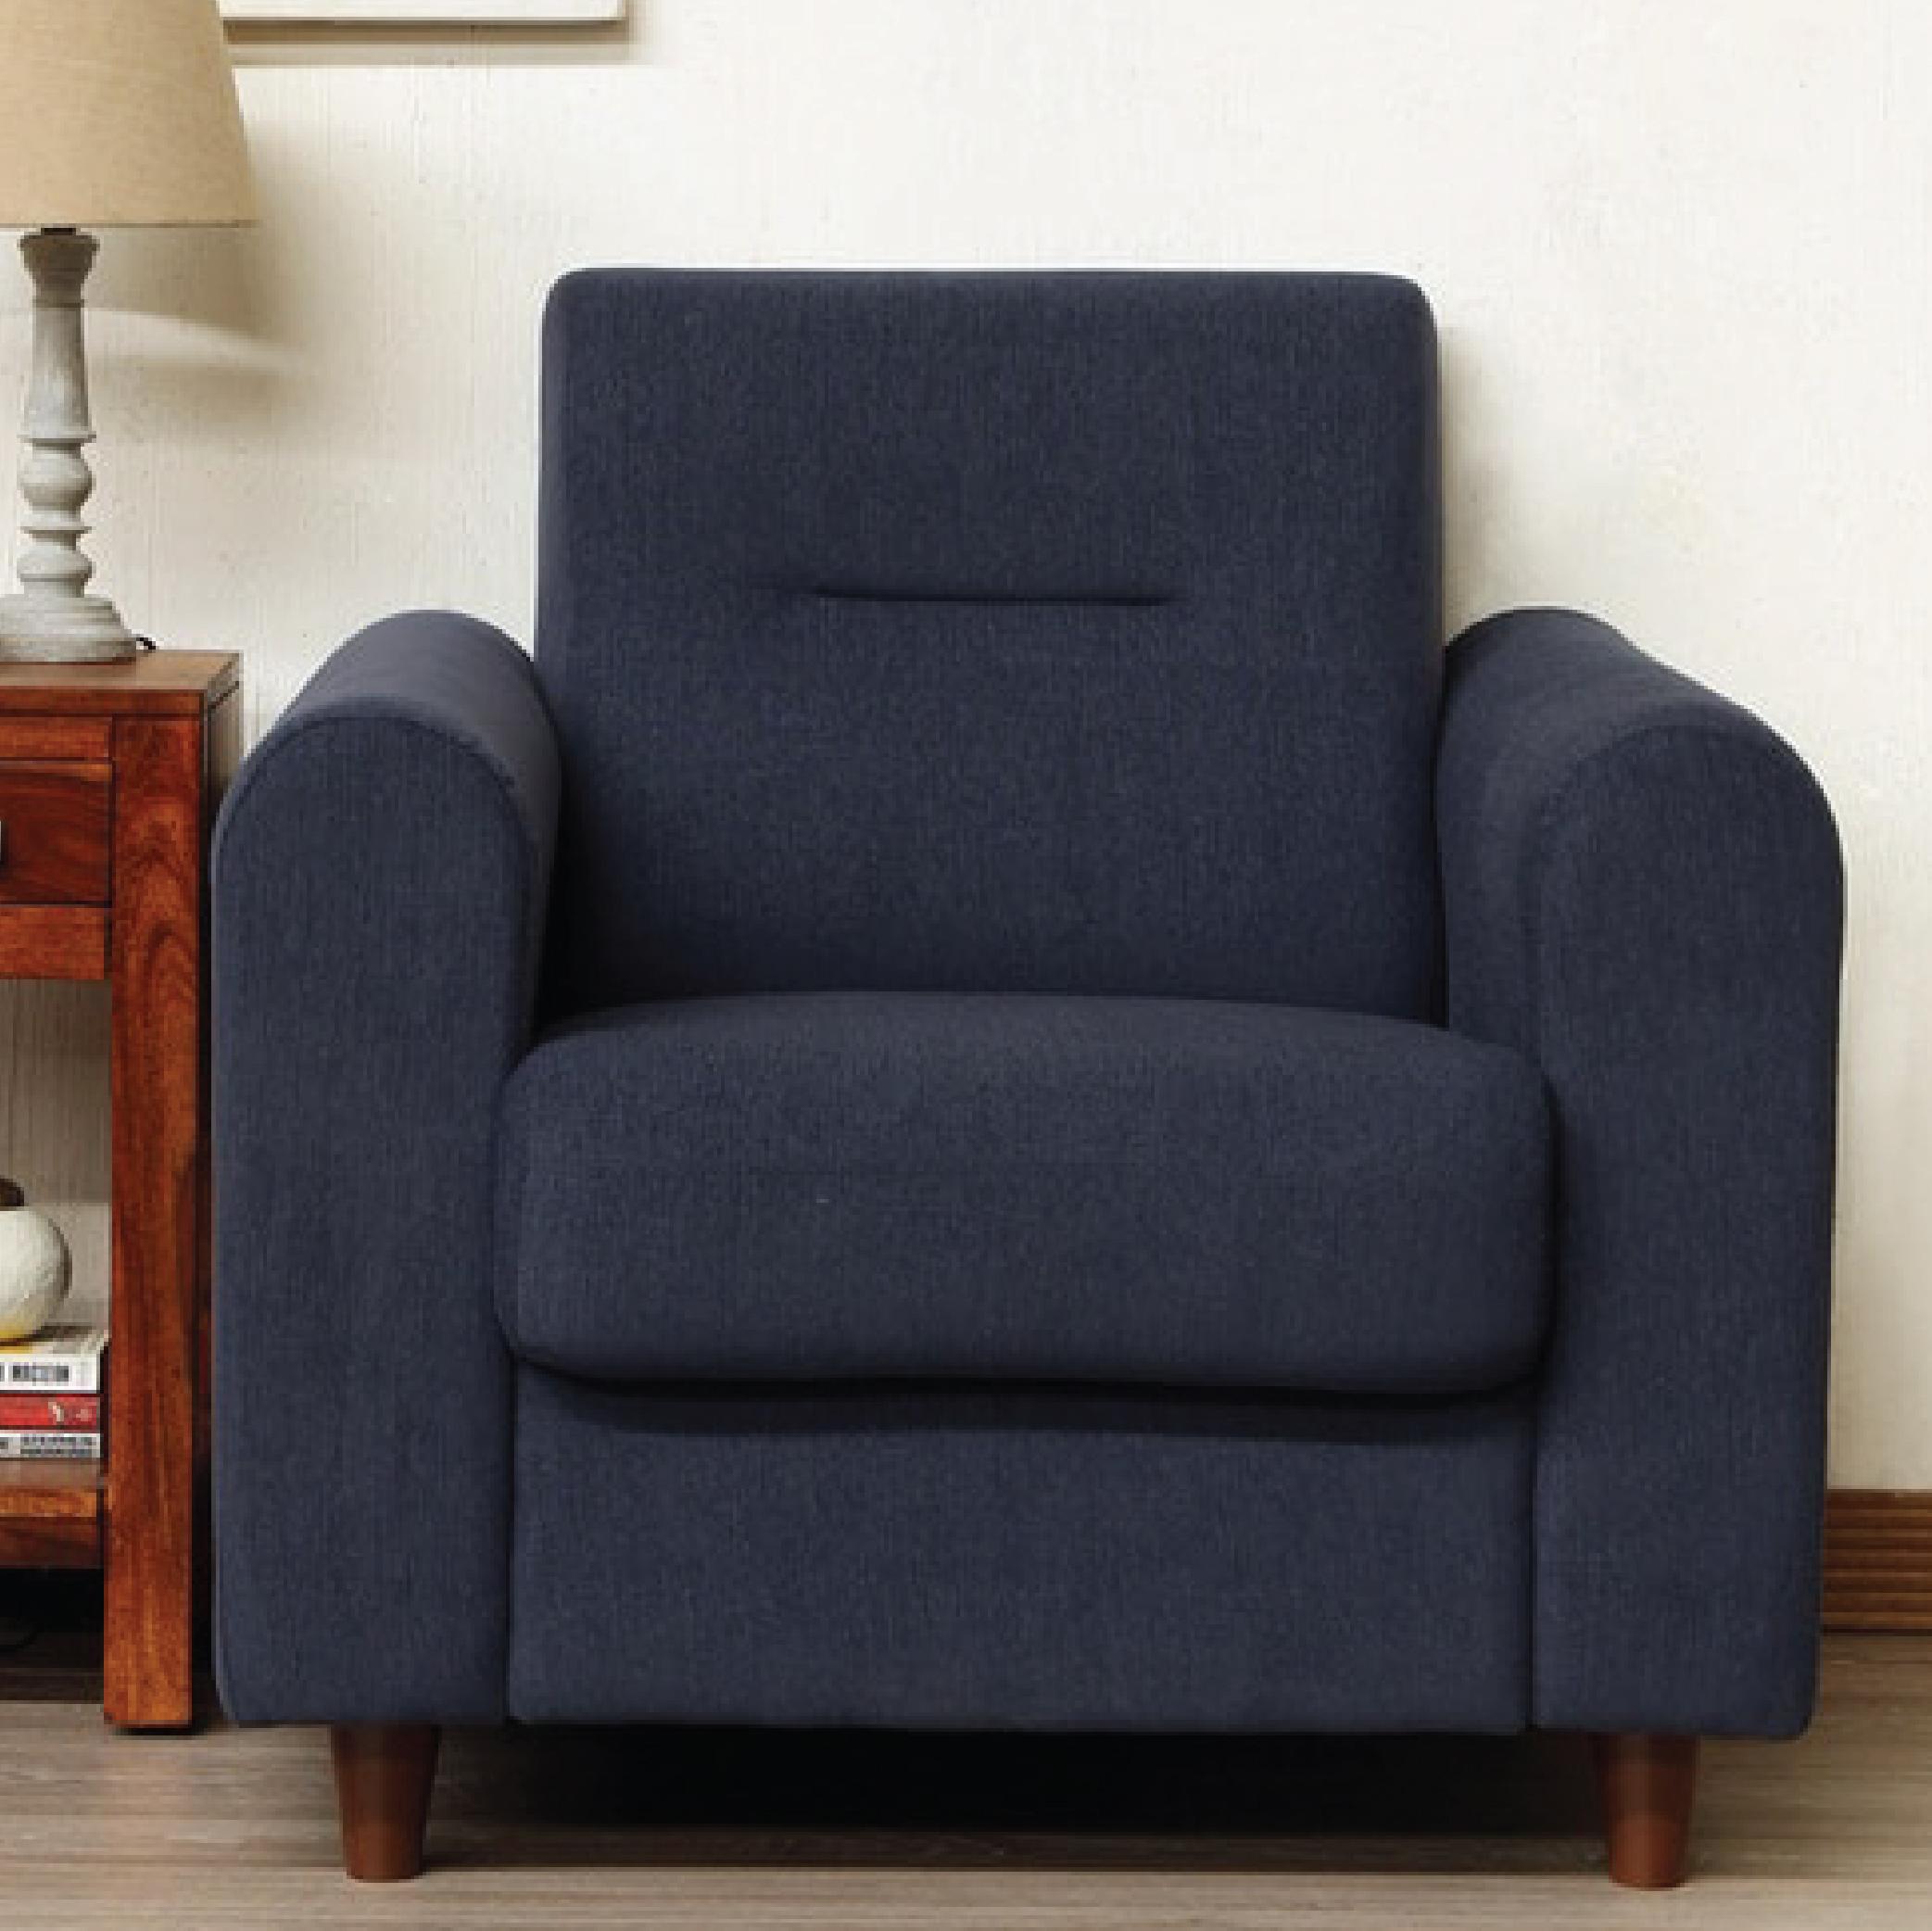 Nola One Seater Sofa in Navy Blue Colour